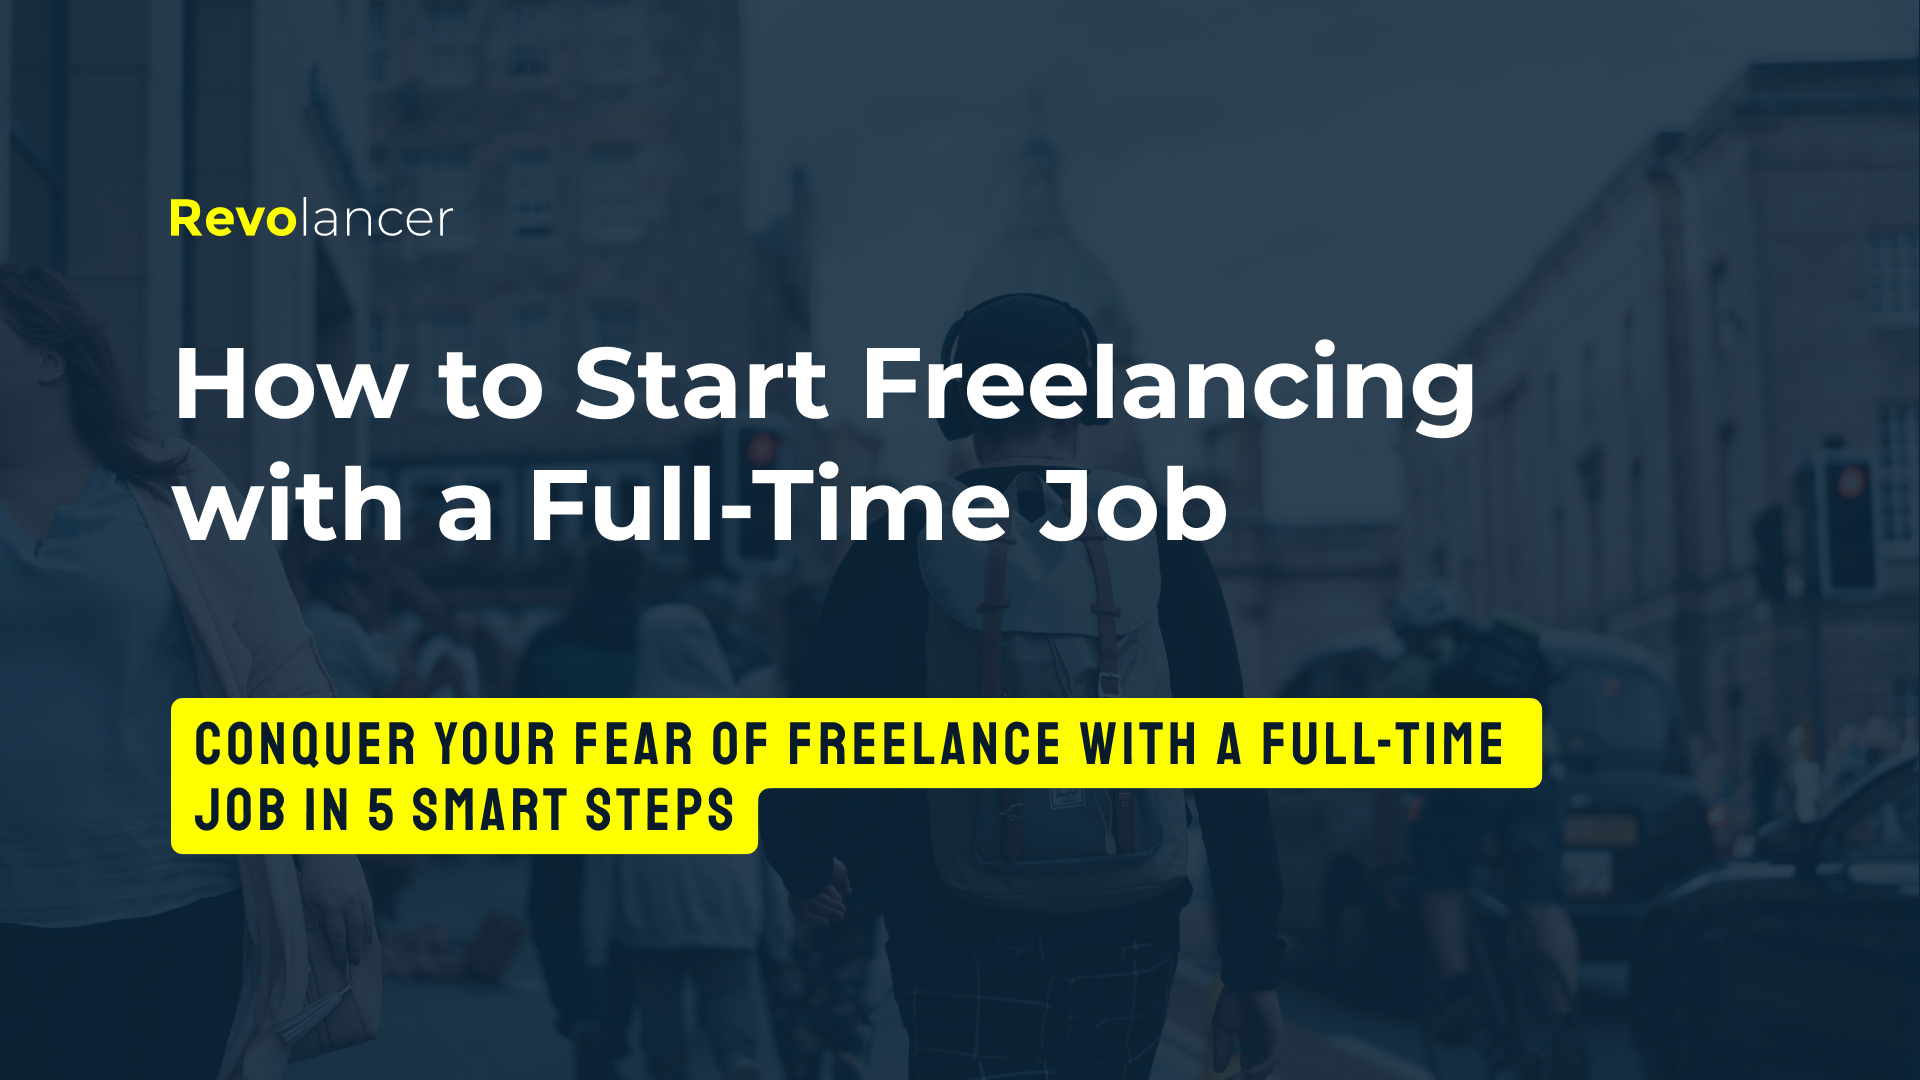 How to start freelancing with a full-time job